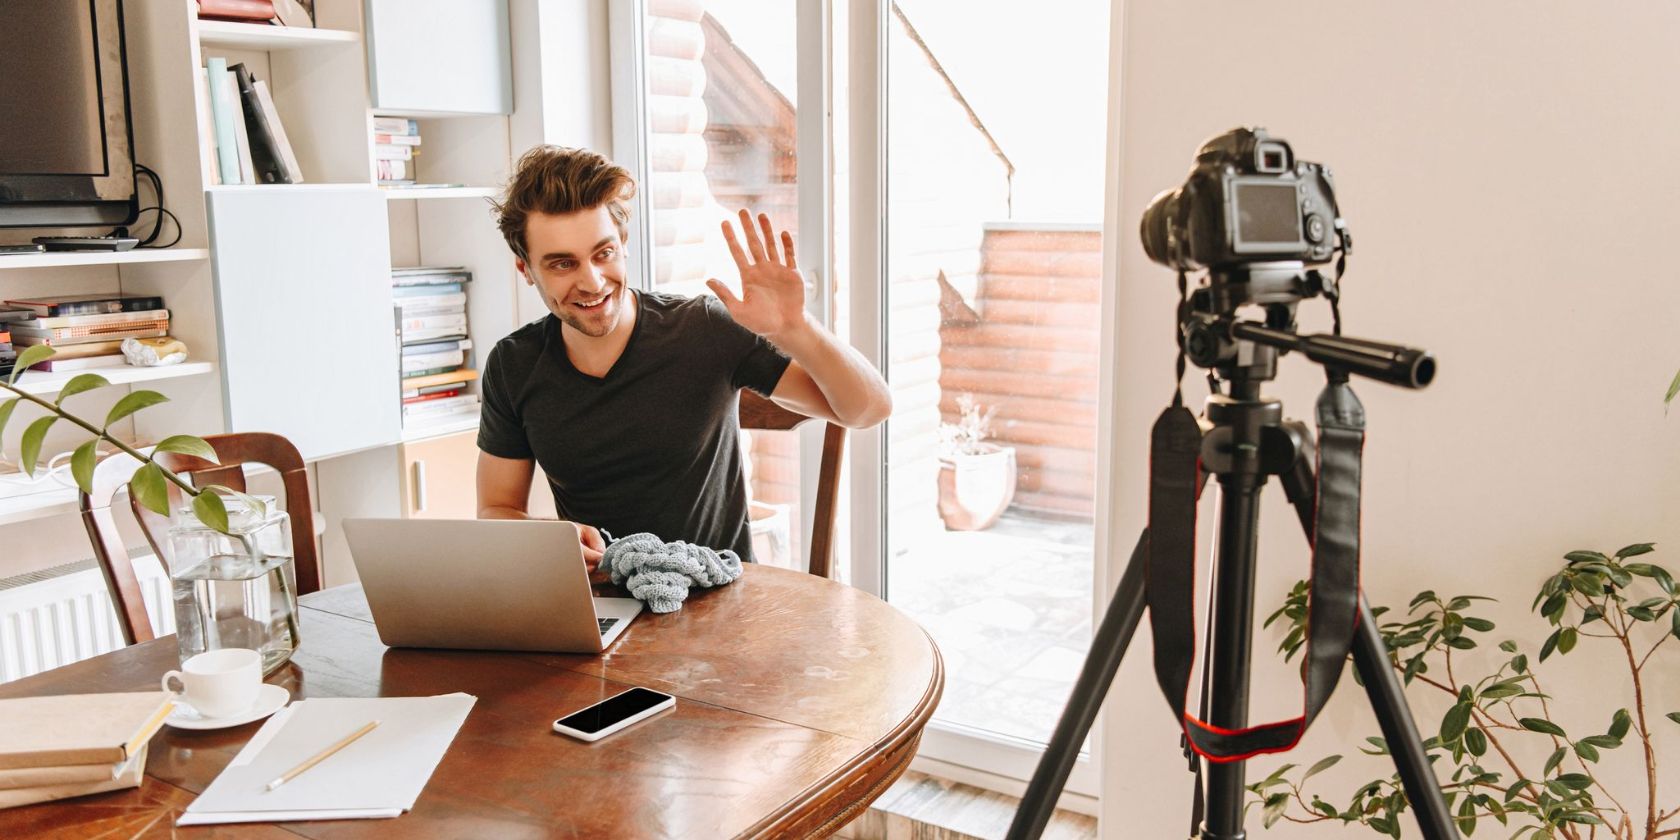 Create effective and professional videos for Instagram with these tricks